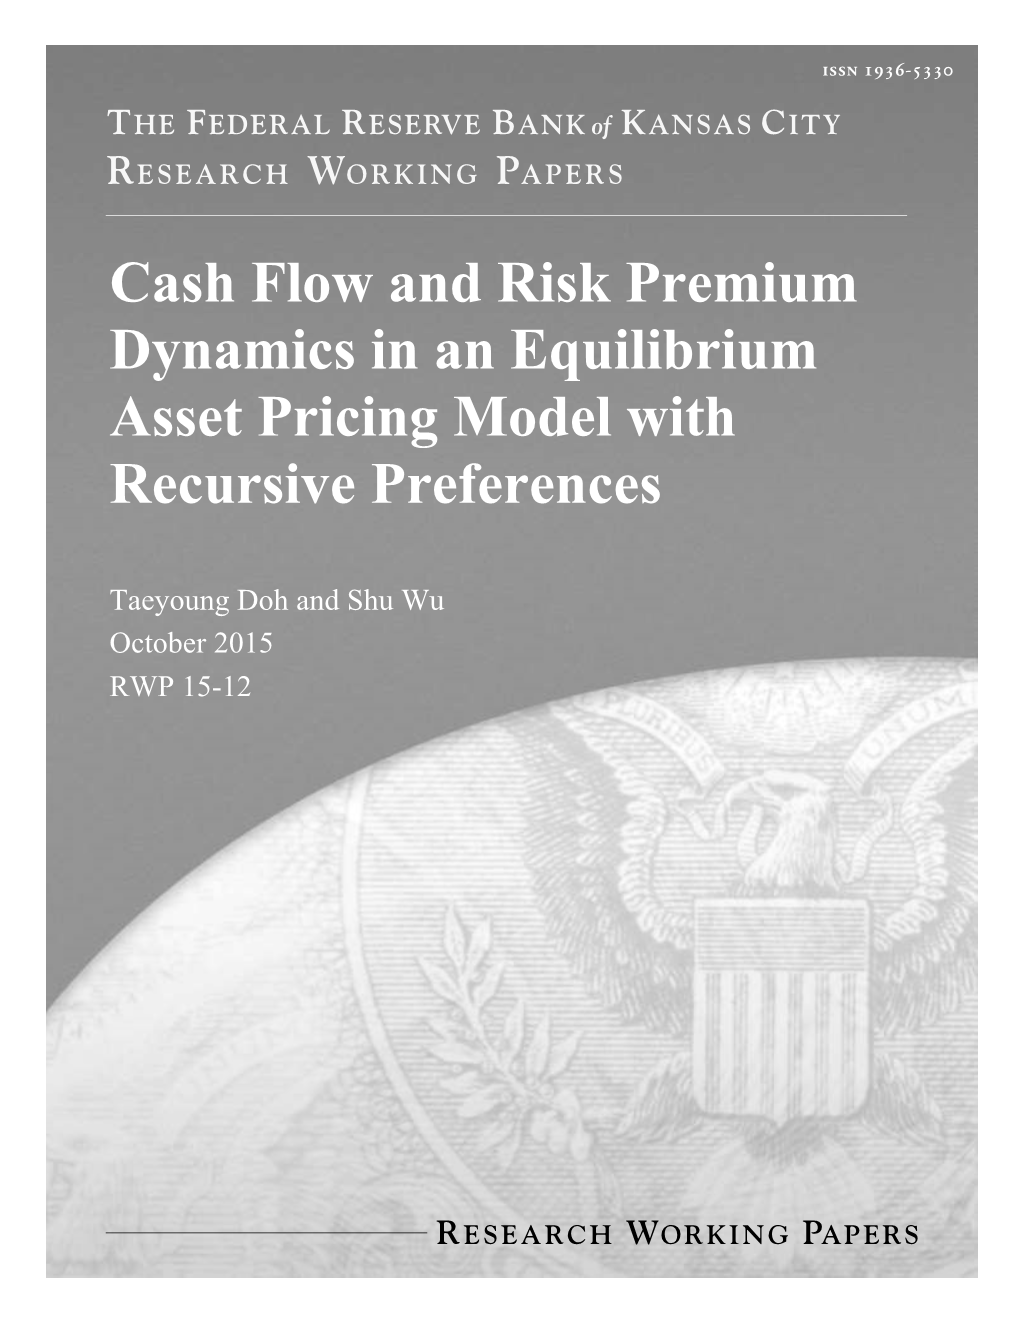 Cash Flow and Risk Premium Dynamics in an Equilibrium Asset Pricing Model with Recursive Preferences